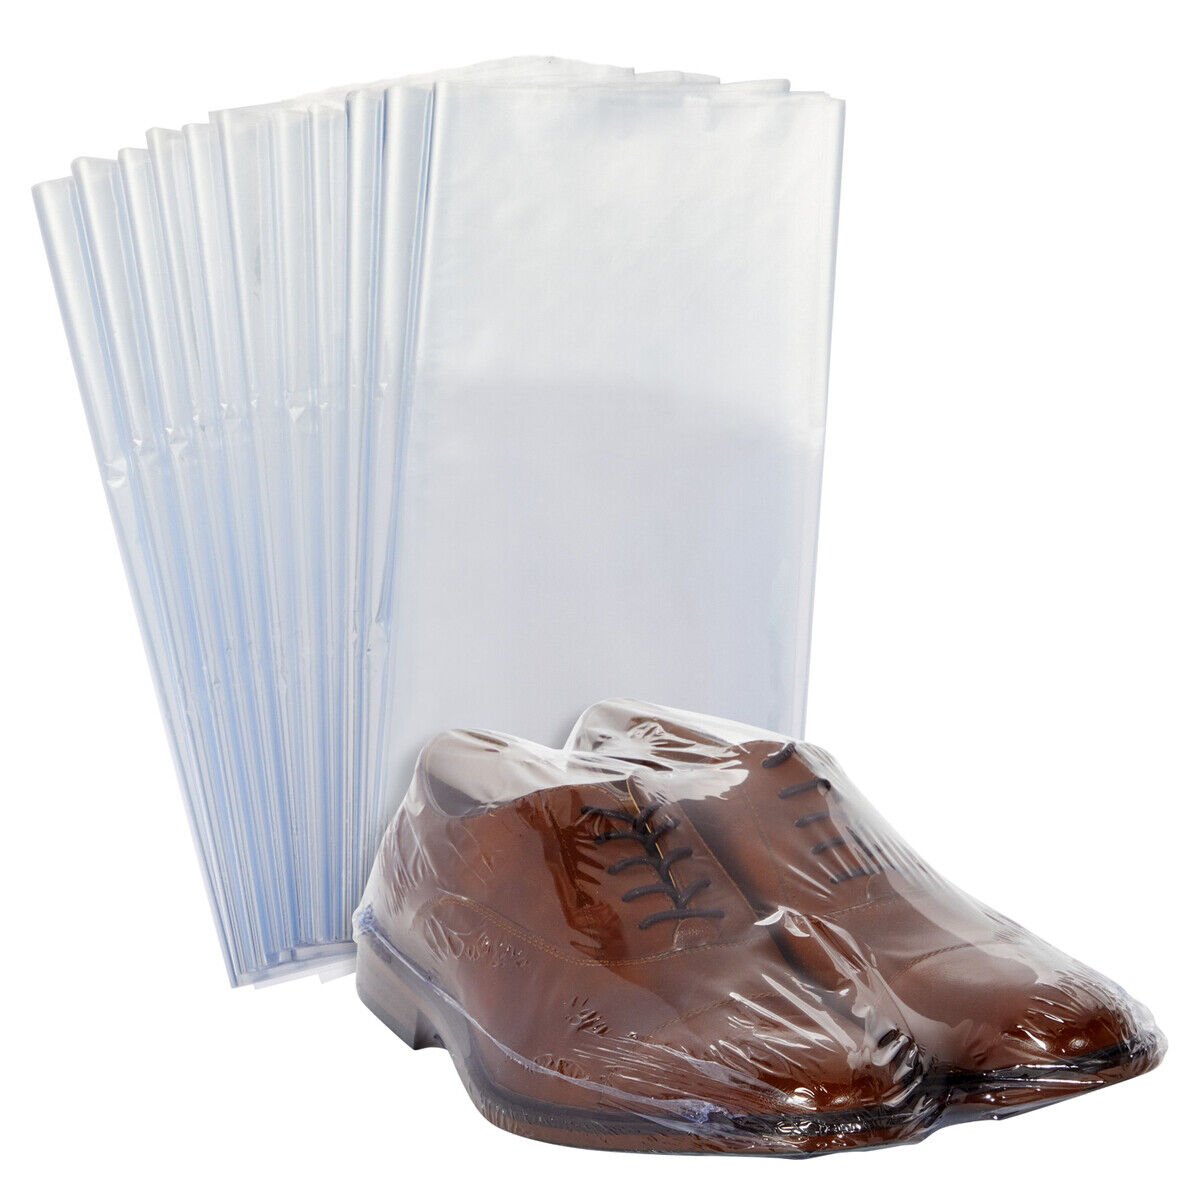 100 Pack PVC Heat Shrink Wrap Film Flat Bags for Packaging Soap, Candles, 15x21""